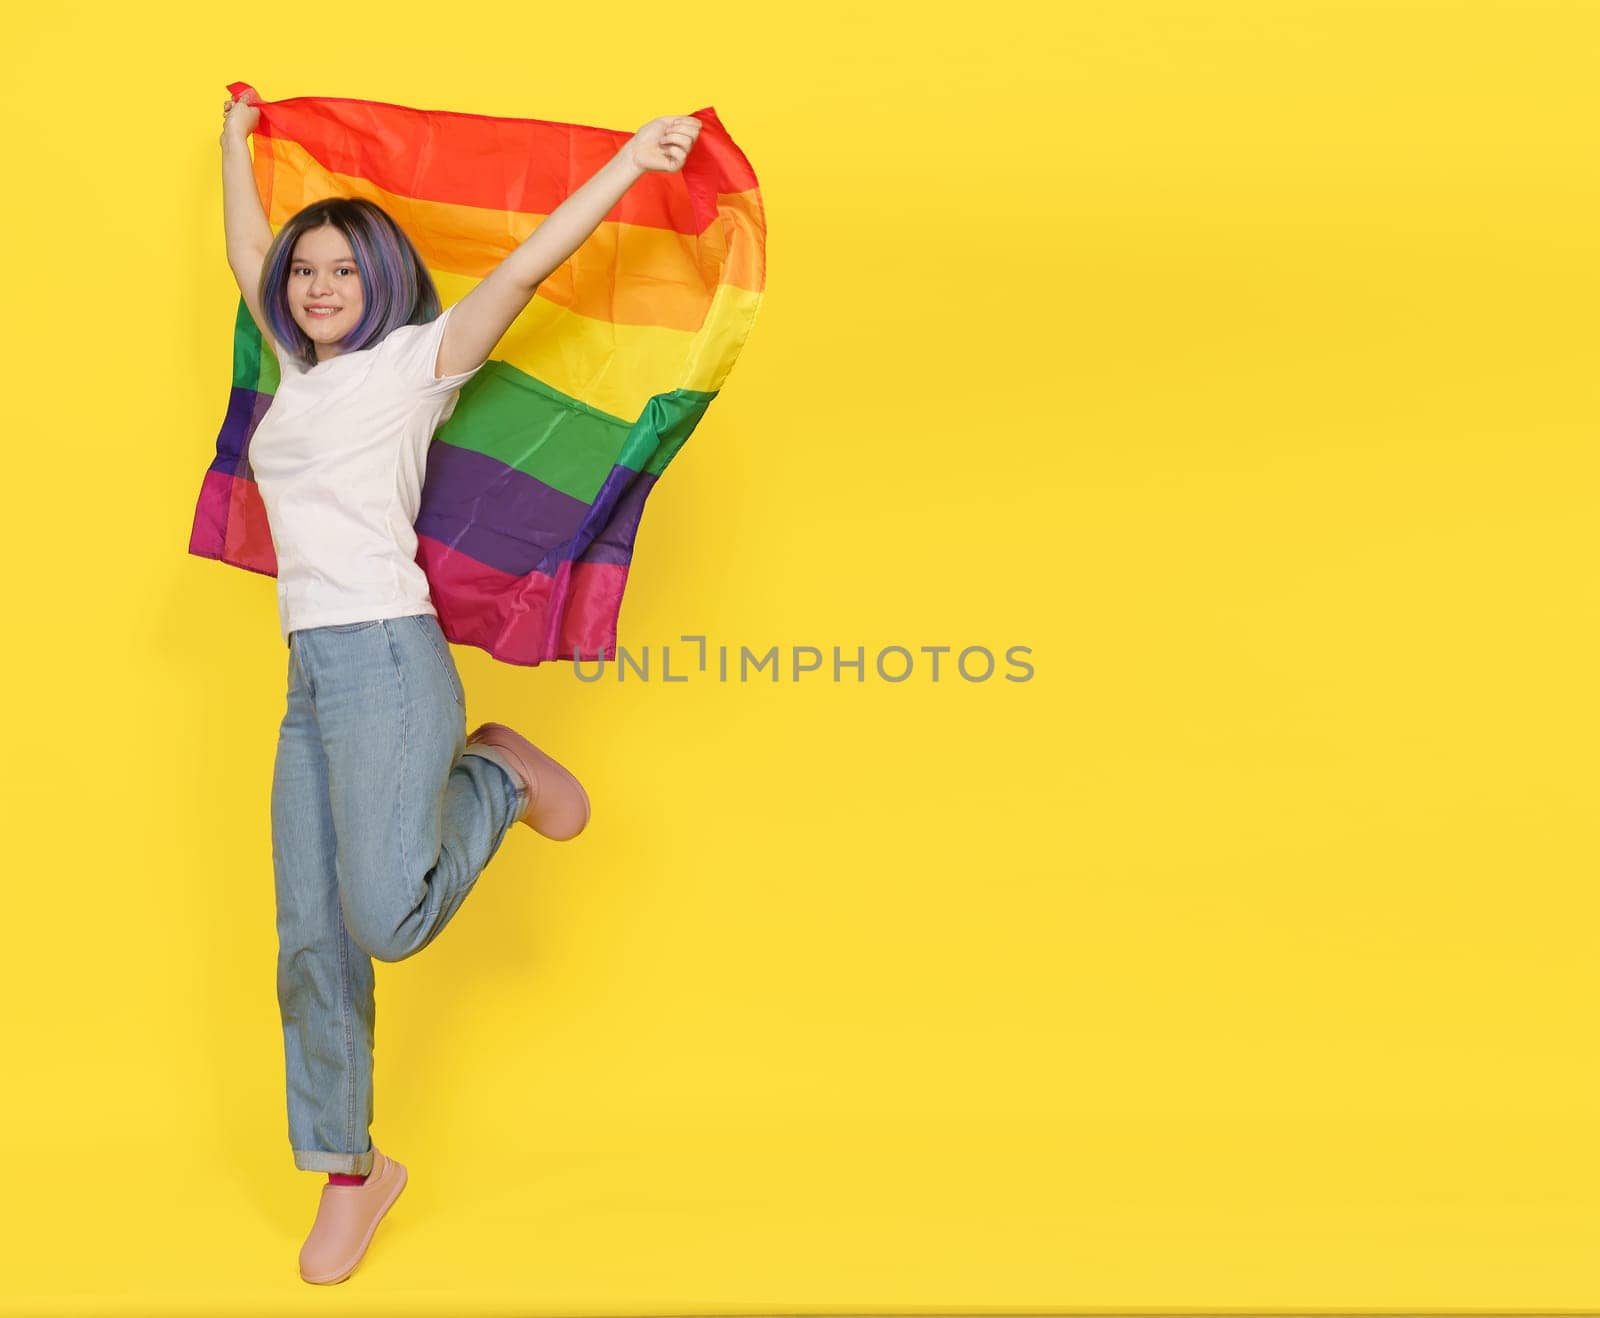 Sense Of Freedom, Equality, and LGBTQ Pride Right Of Any Person To Choose Sexual Orientation. Happy And Smiling Girl Jumps With Rainbow Flag. Isolated On Yellow Background With Copy Space by LipikStockMedia